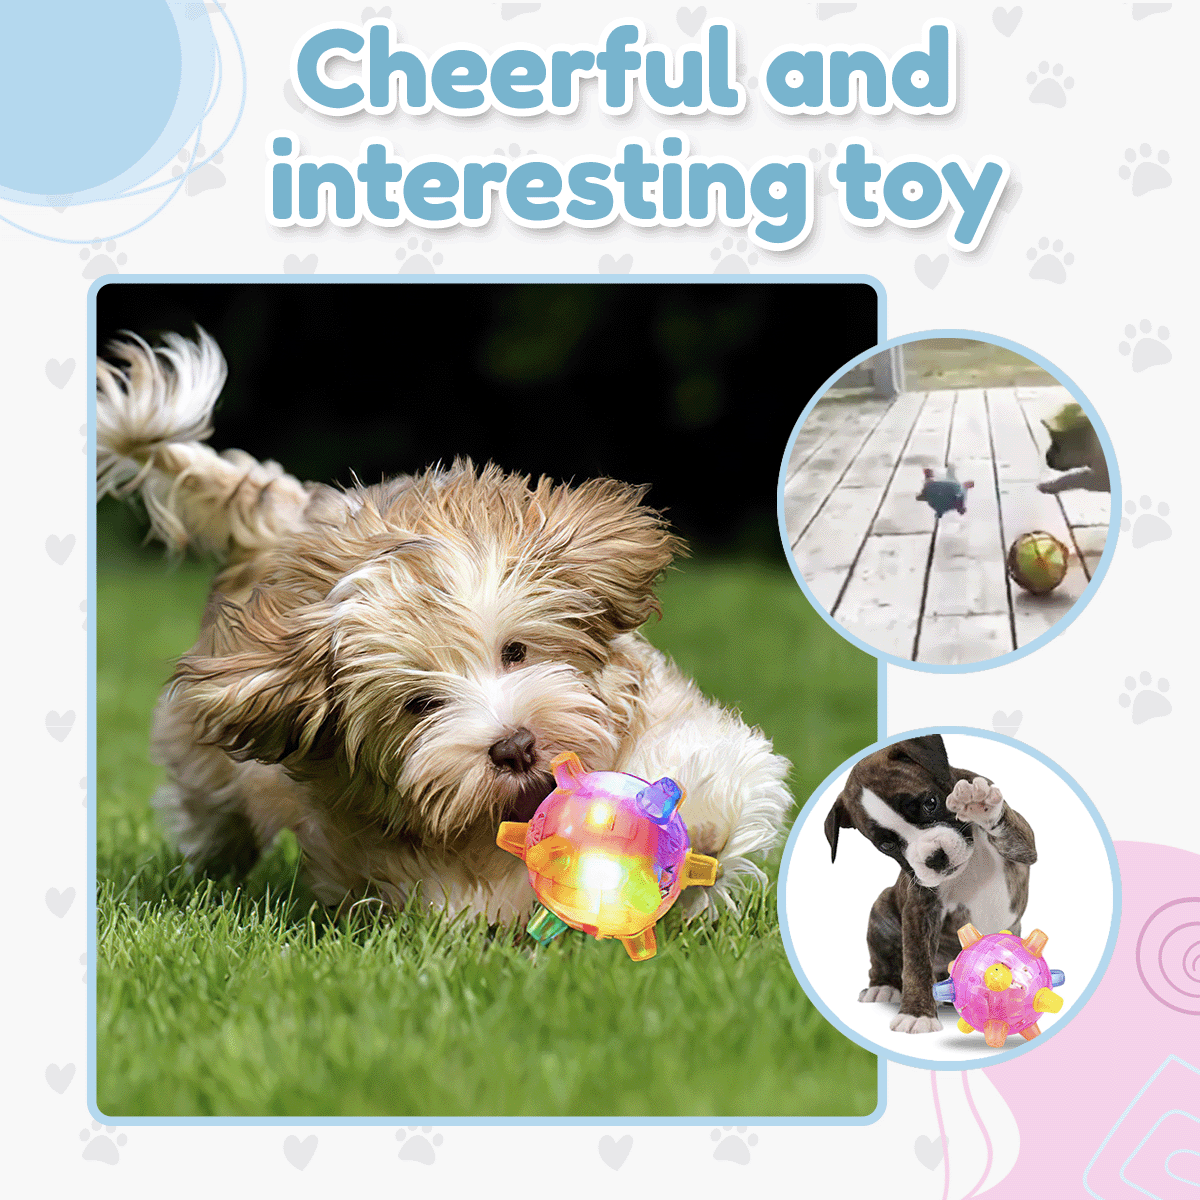 Jumping Activation Flashing Ball Light Sounds Dog Toys - A fun and interactive toy that will keep your dog entertained for hours.